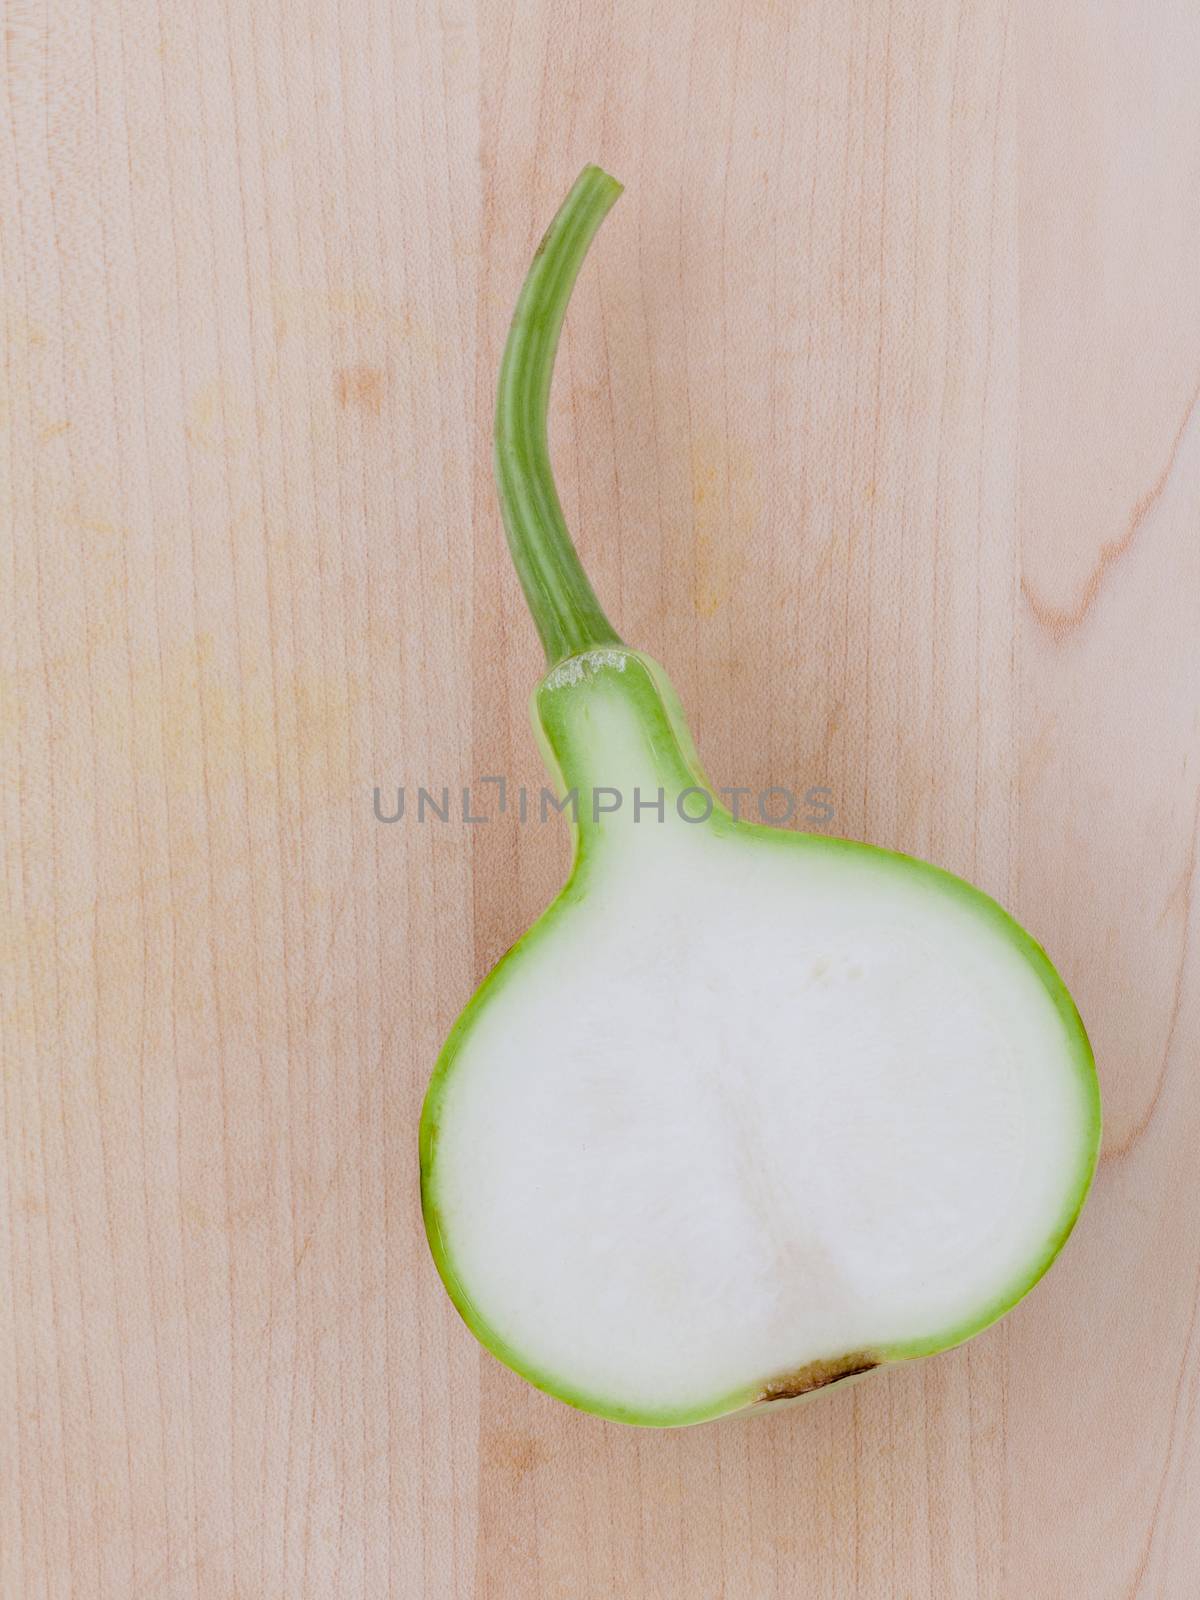 Halved bottle gourd or calabash gourd .The one of the vegetables recommended  in weight control programs.